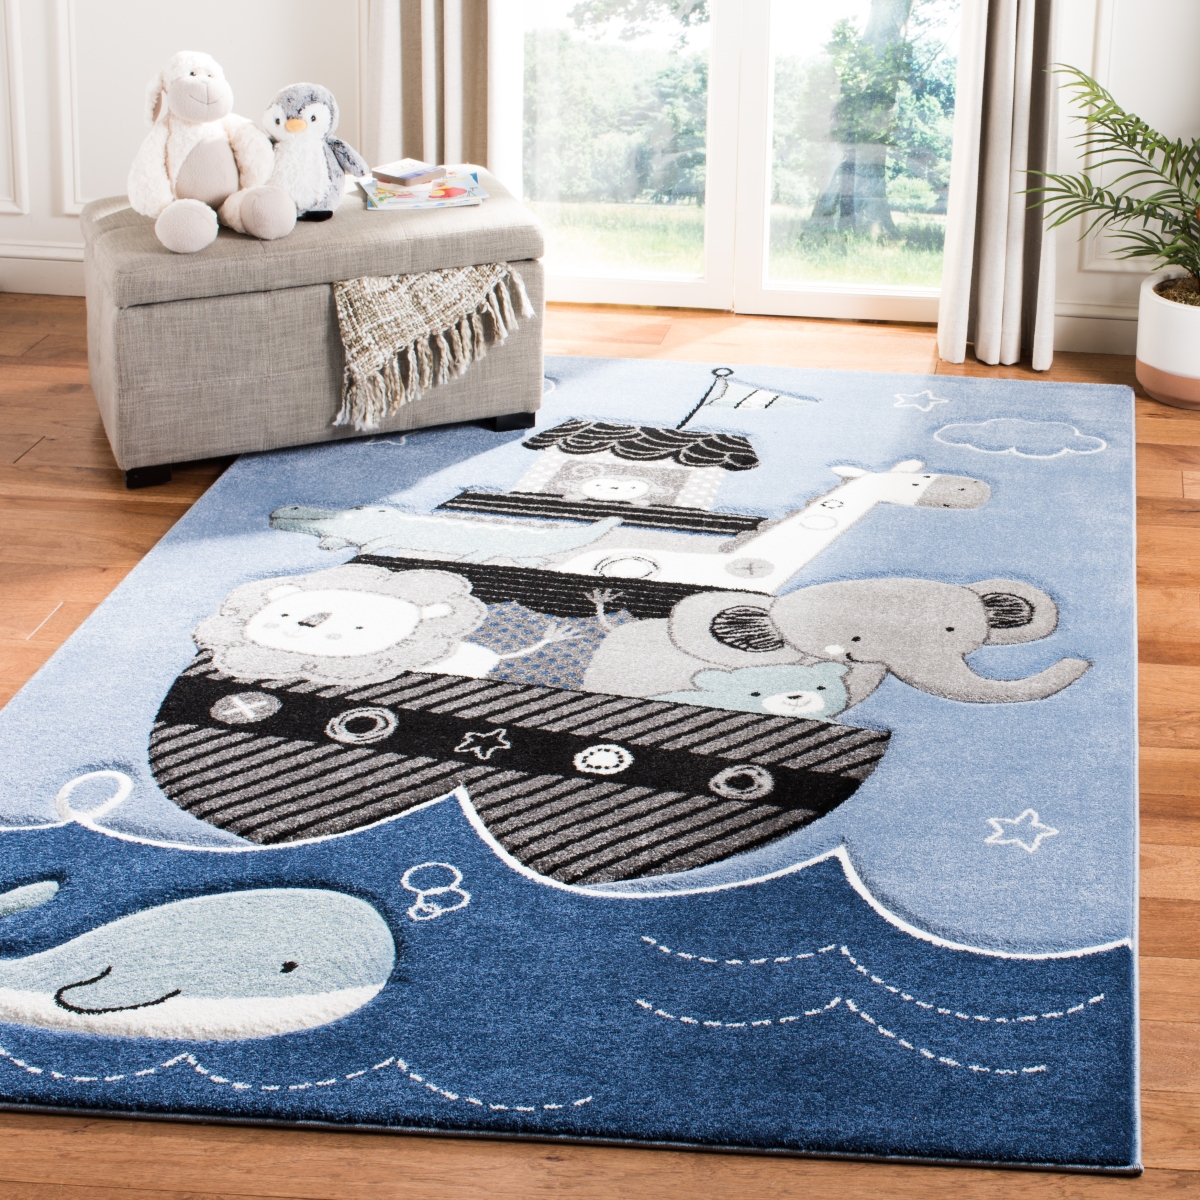 Crk121b-5 5 Ft. 3 In. X 7 Ft. 6 In. Carousel Kids Rectangle Power Loomed Area Rug, Blue & Grey